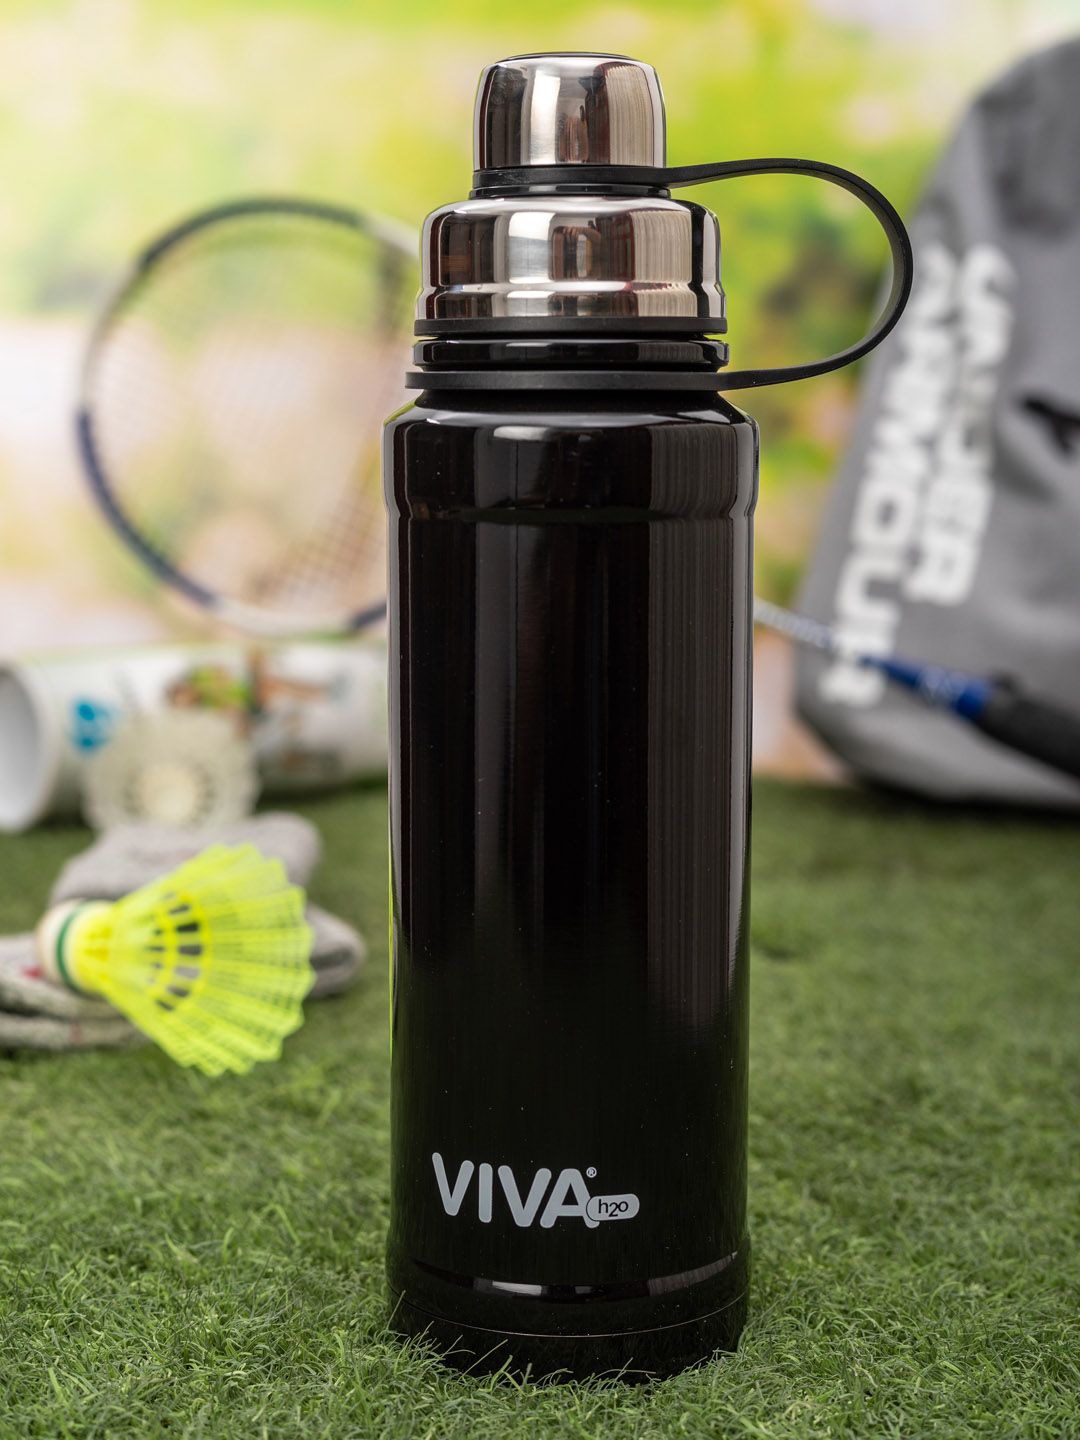 VIVA h2o Unisex Black Solid Double Wall Stainless Steel Vaccum Insulated Water Bottle Price in India